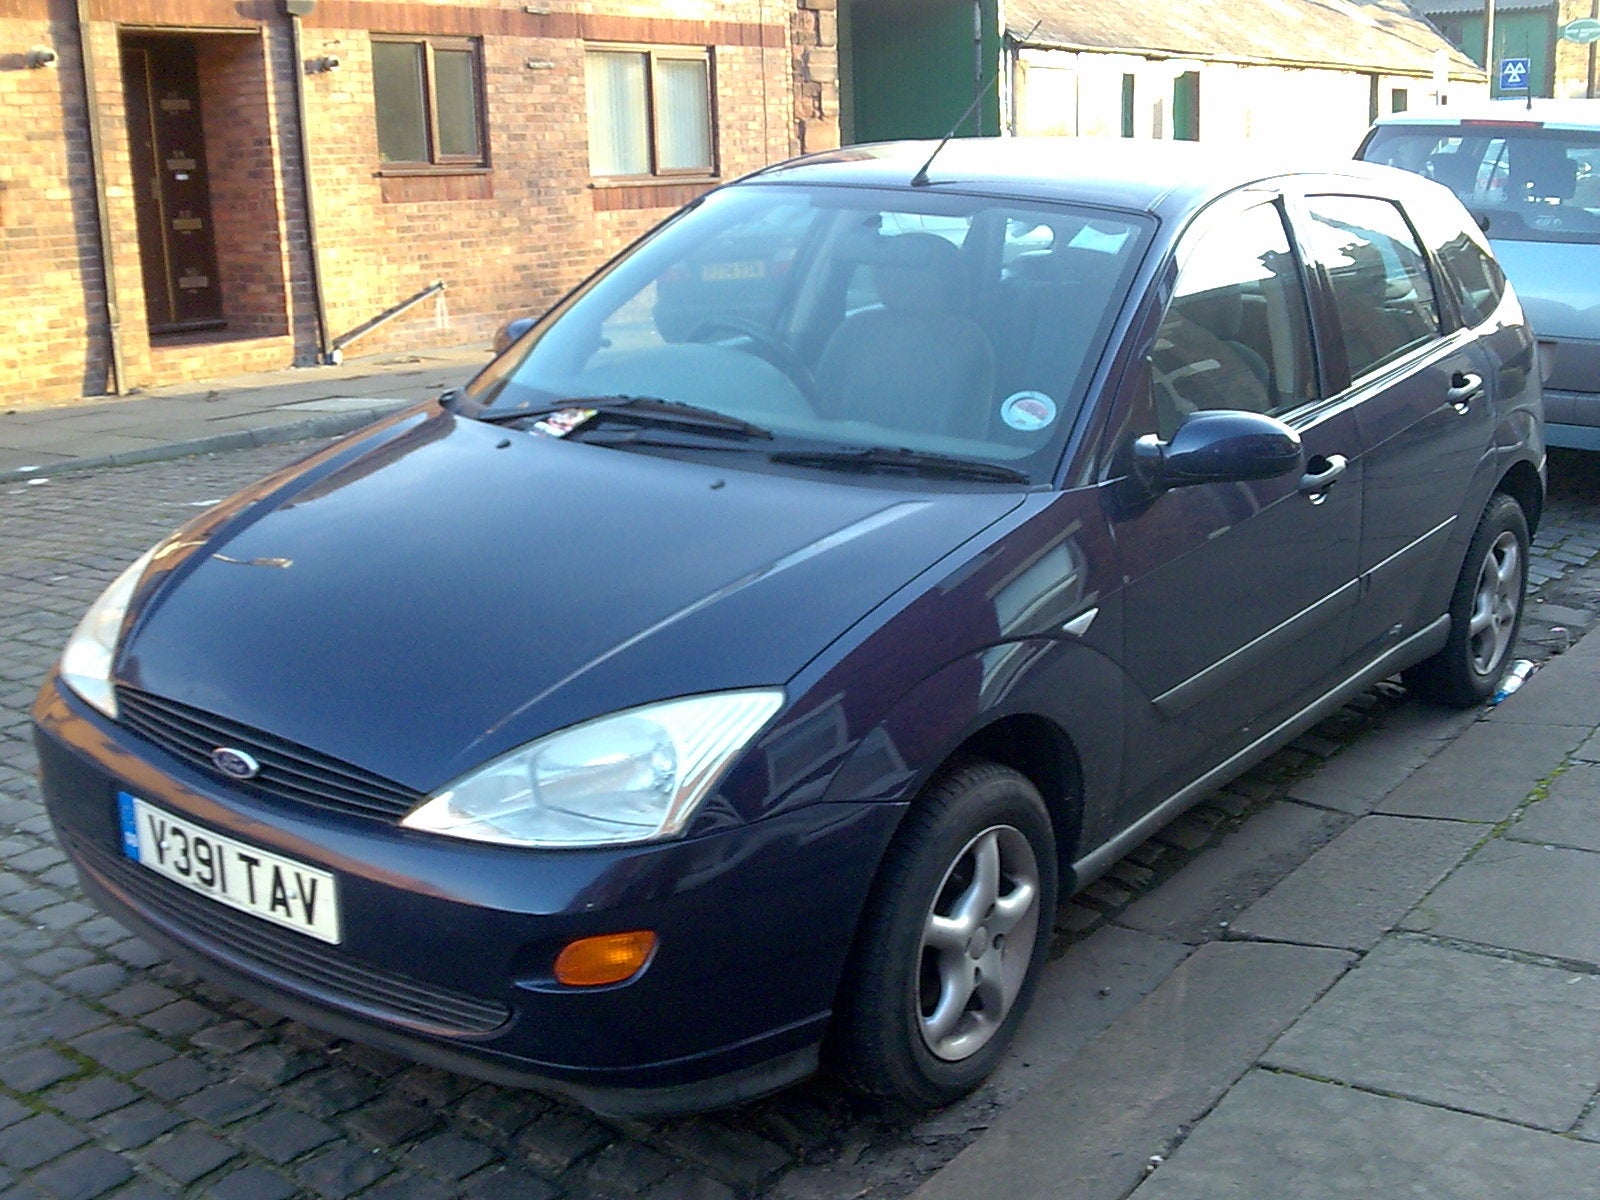 Ford Focus - Wikipedia